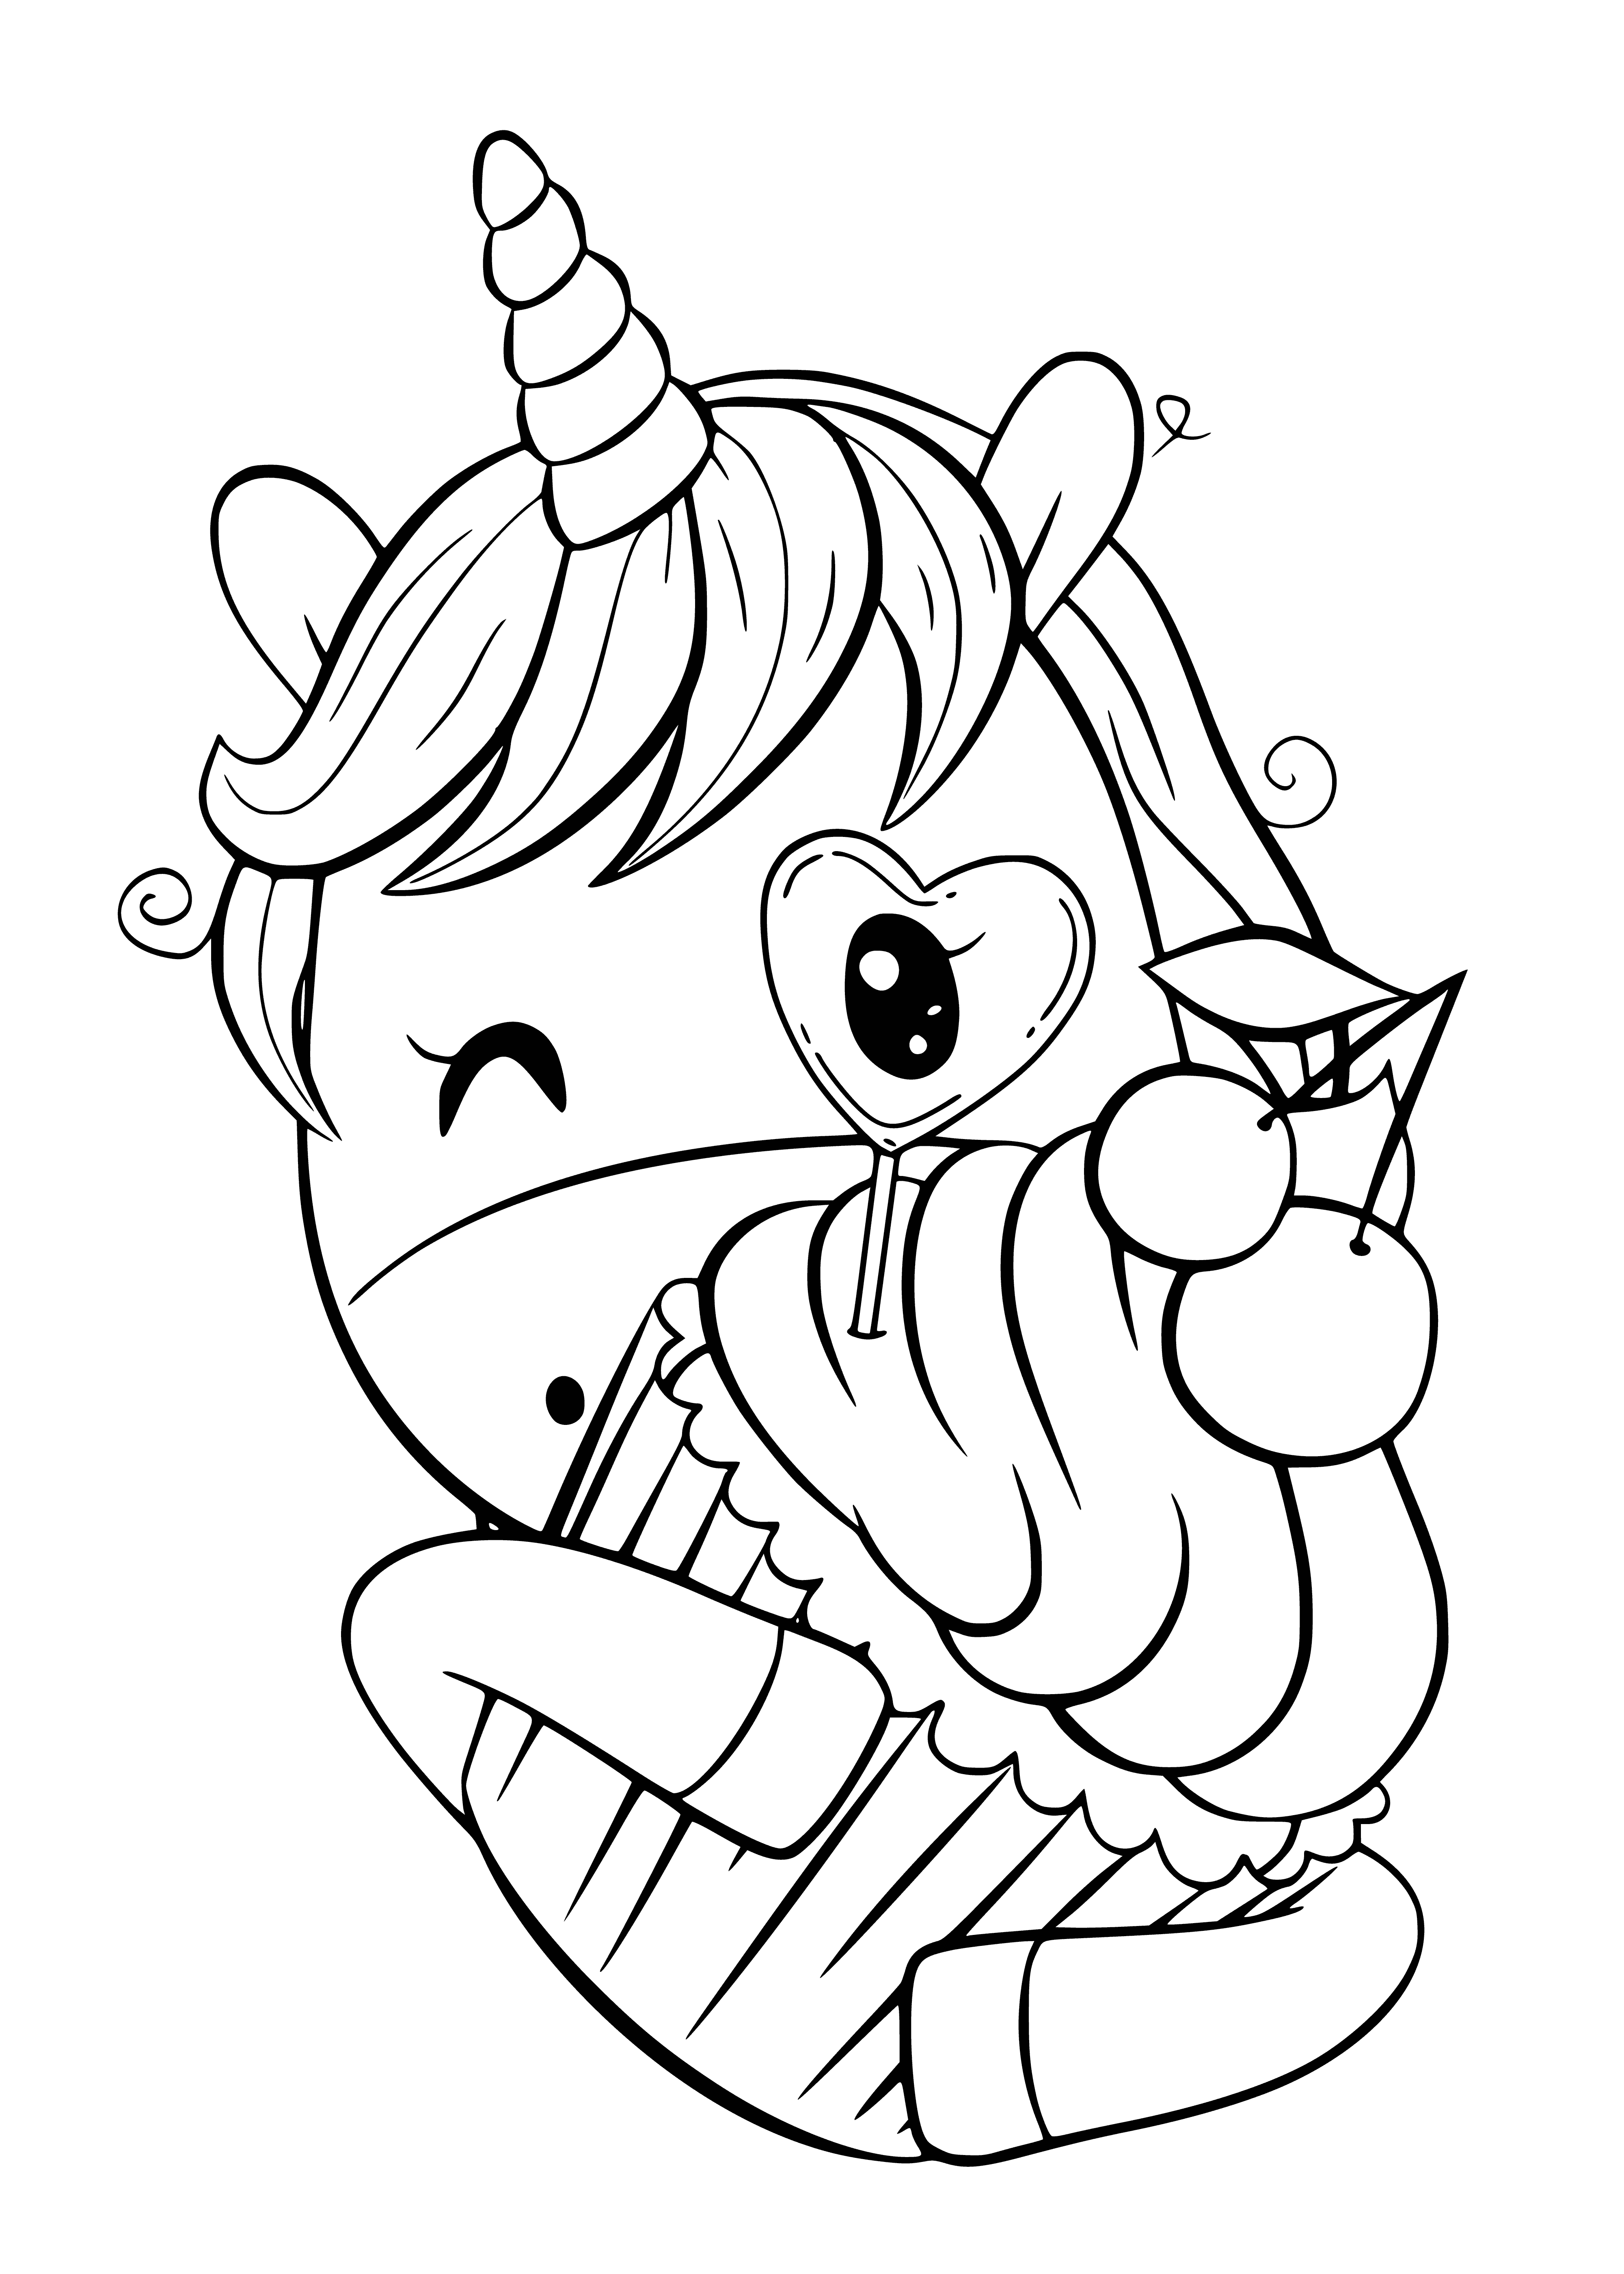 coloring page: A colorful unicorn flies in a rainbow sky with a silver horn, pink mane & tail, and a star on its forehead.